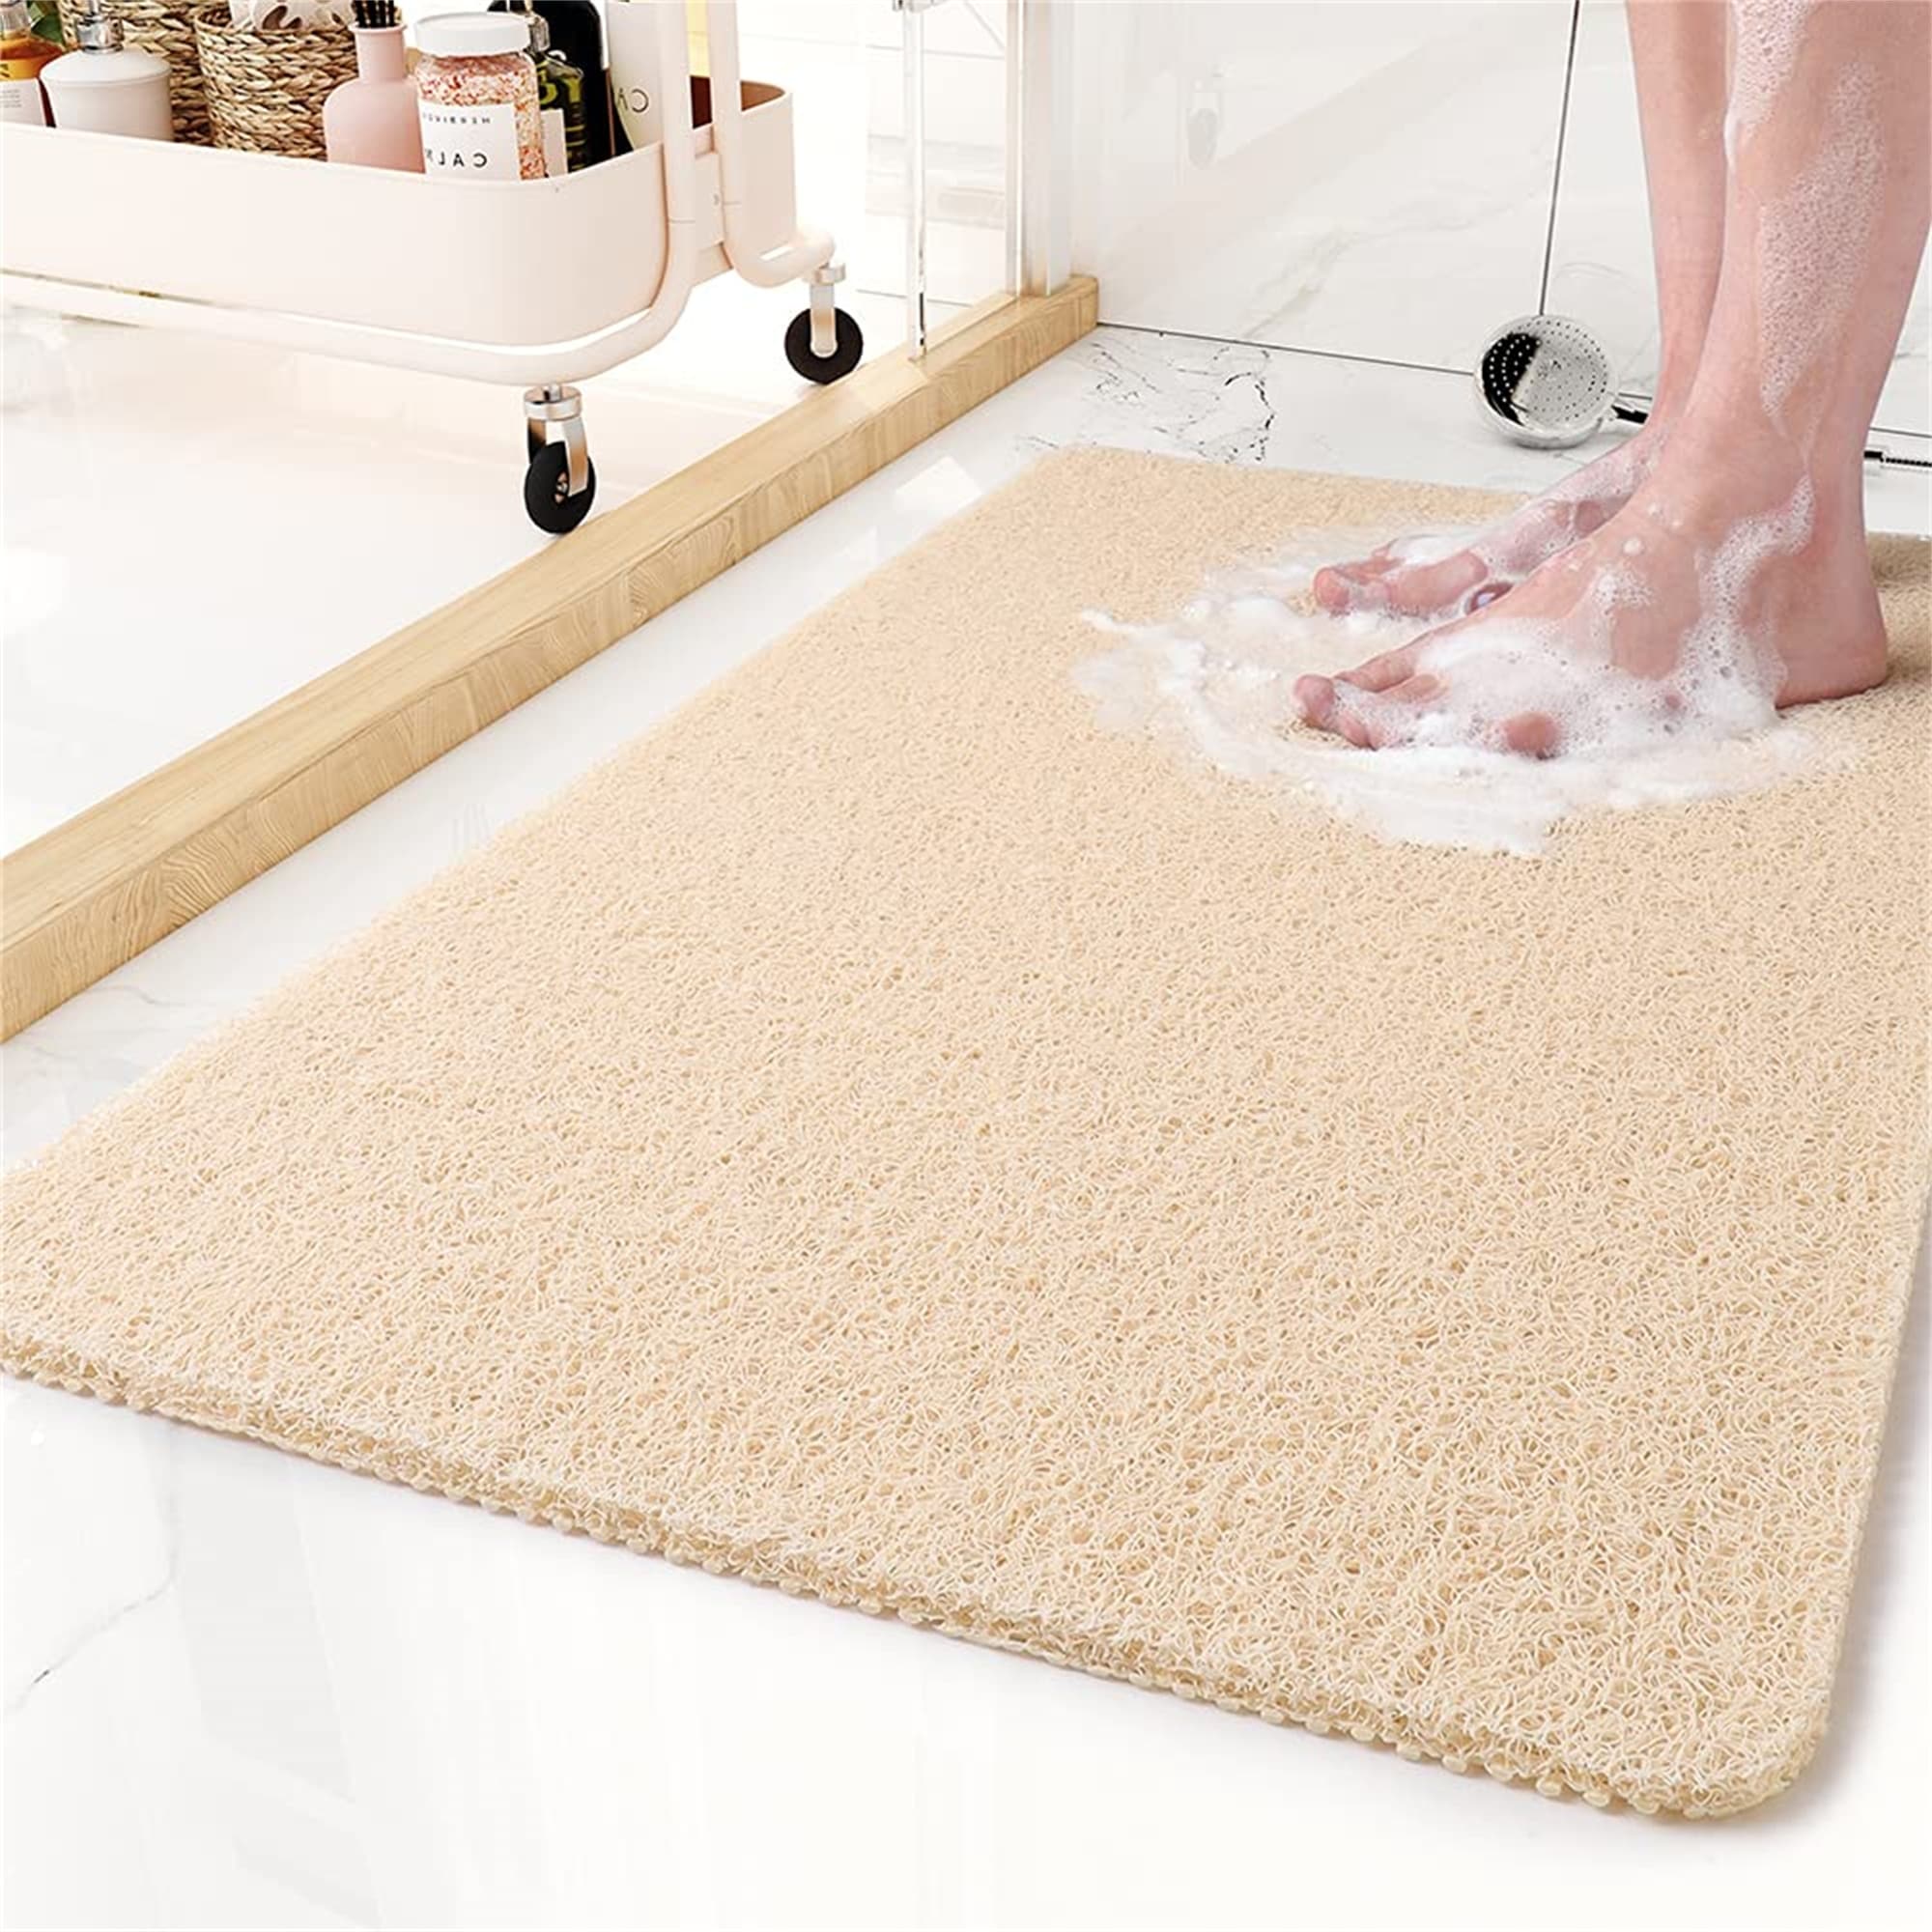 https://ak1.ostkcdn.com/images/products/is/images/direct/2fb731c68a9a60d721d3e399ba3008631a44dc90/Non-Slip-Bathtub-Mat.jpg